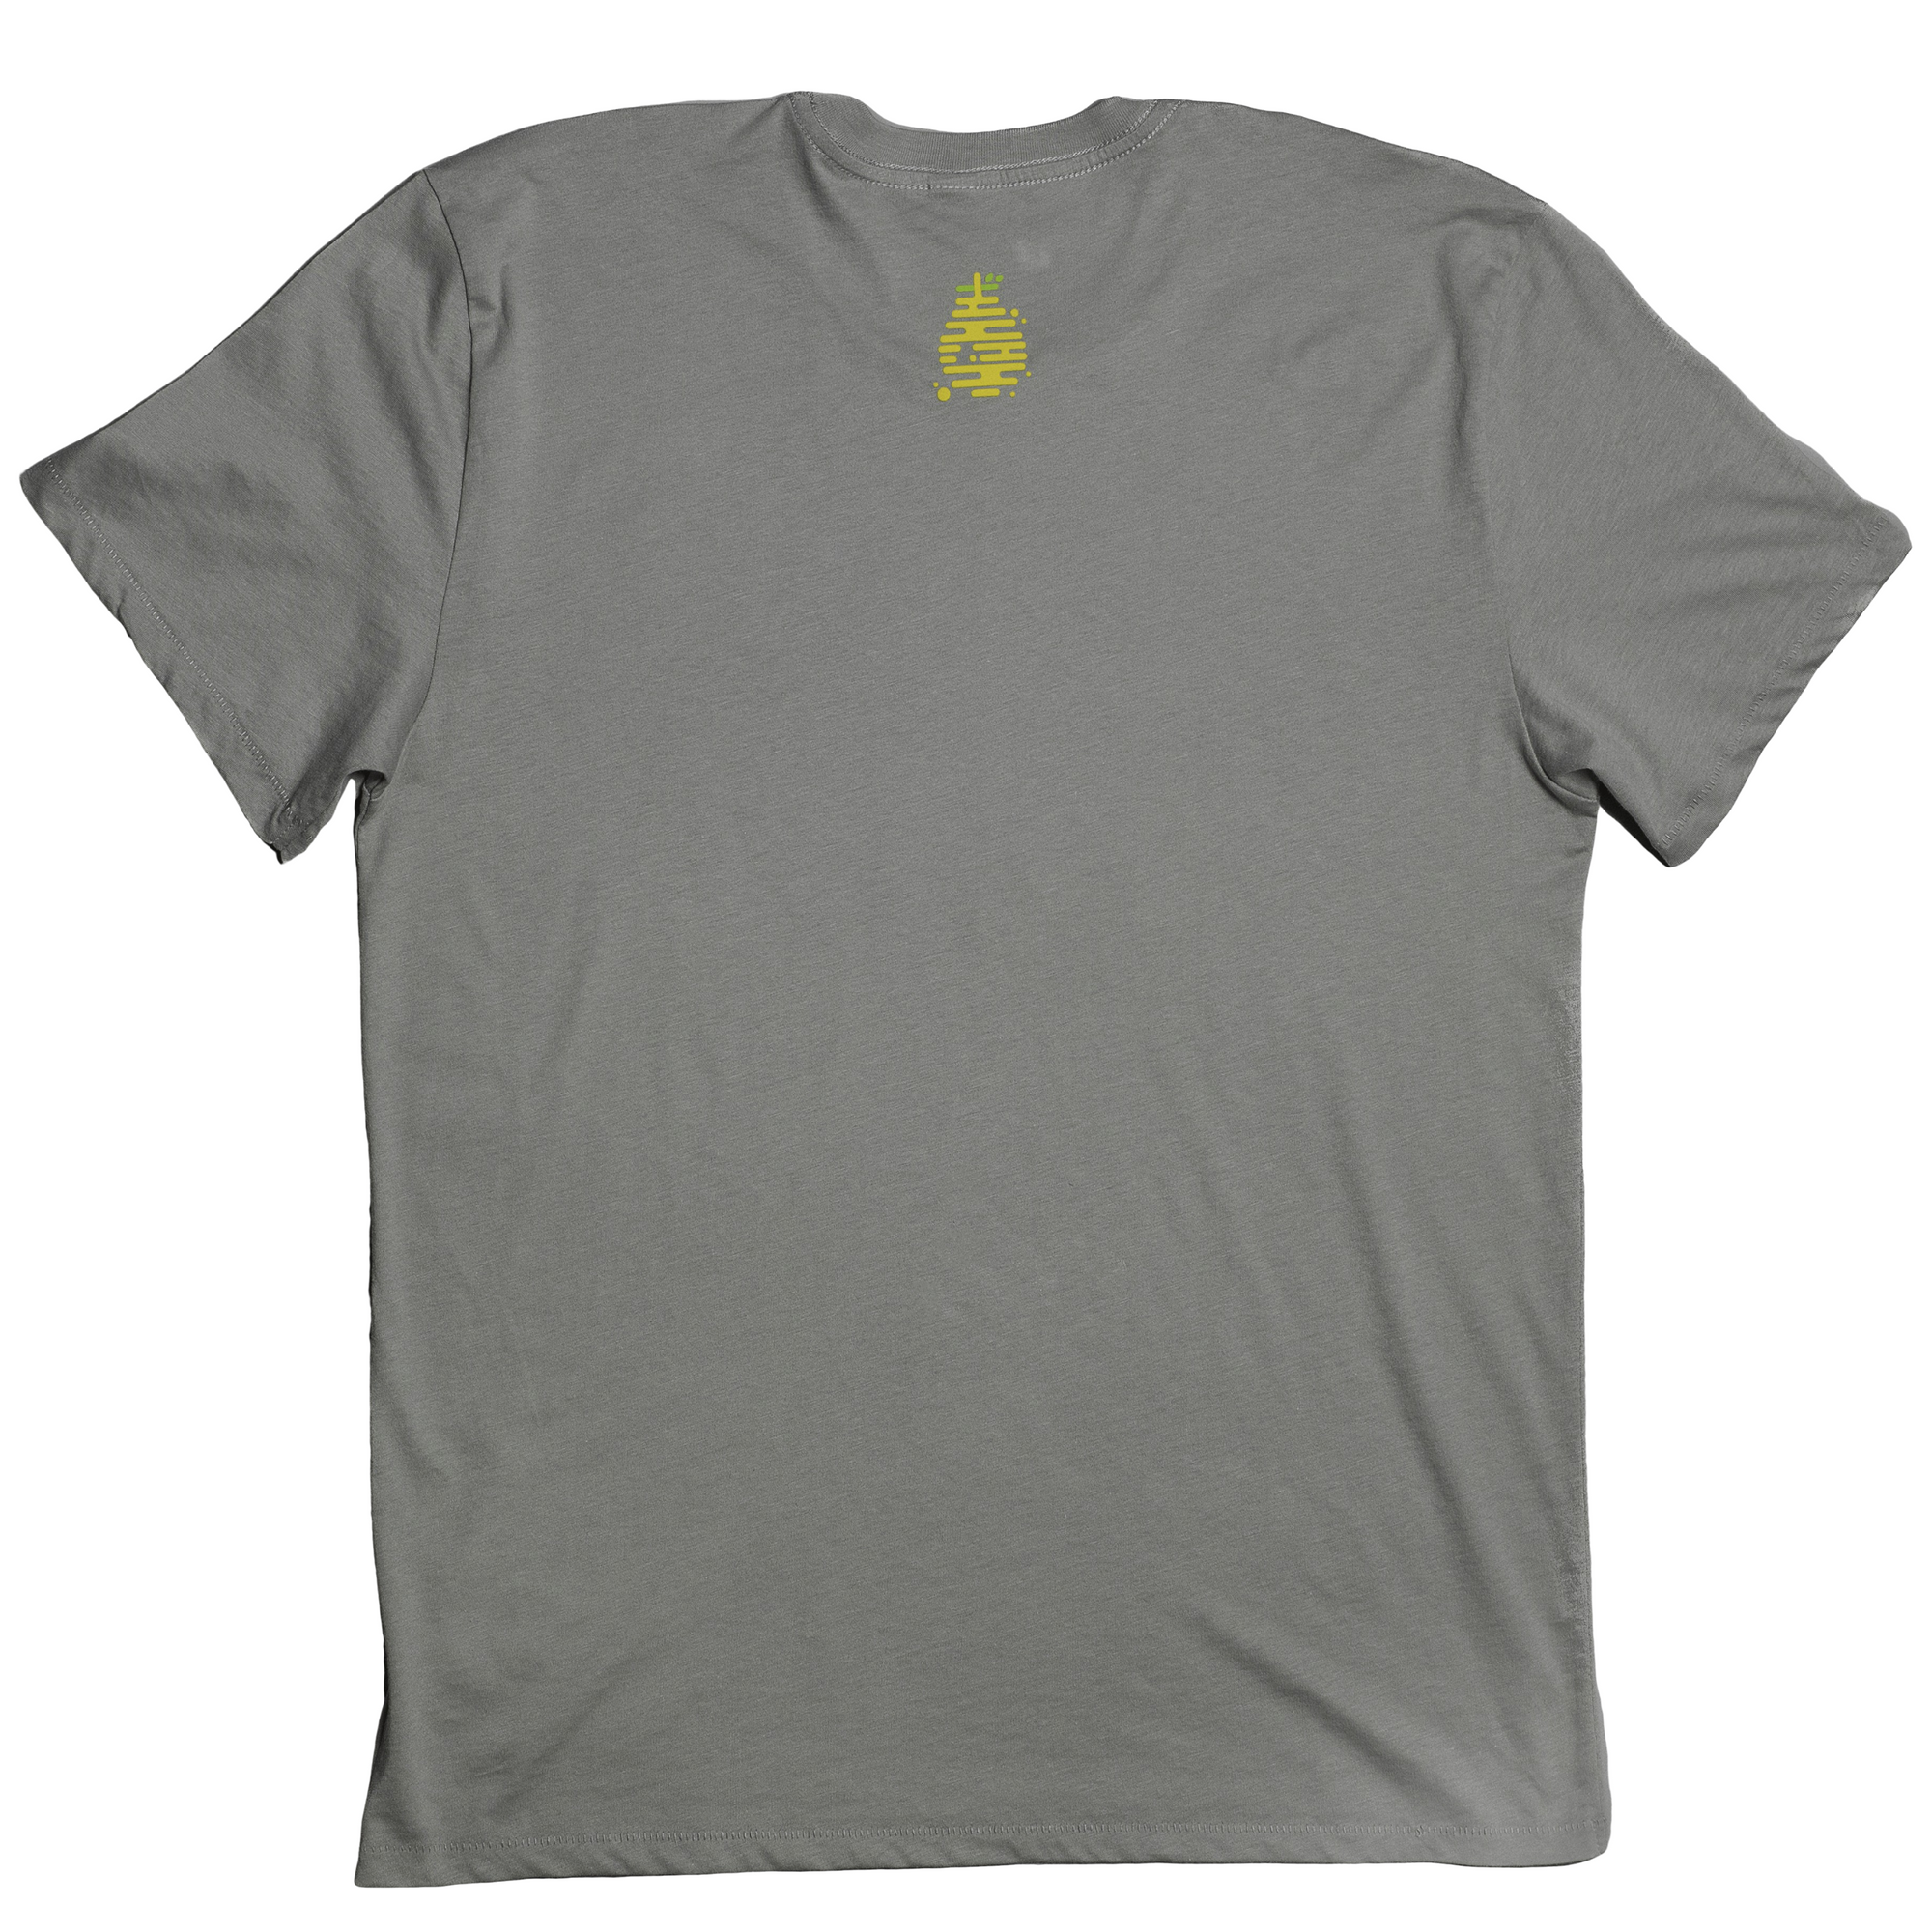 Sea Worthy - GreenHive Collective - ECO-FRIENDLY APPAREL